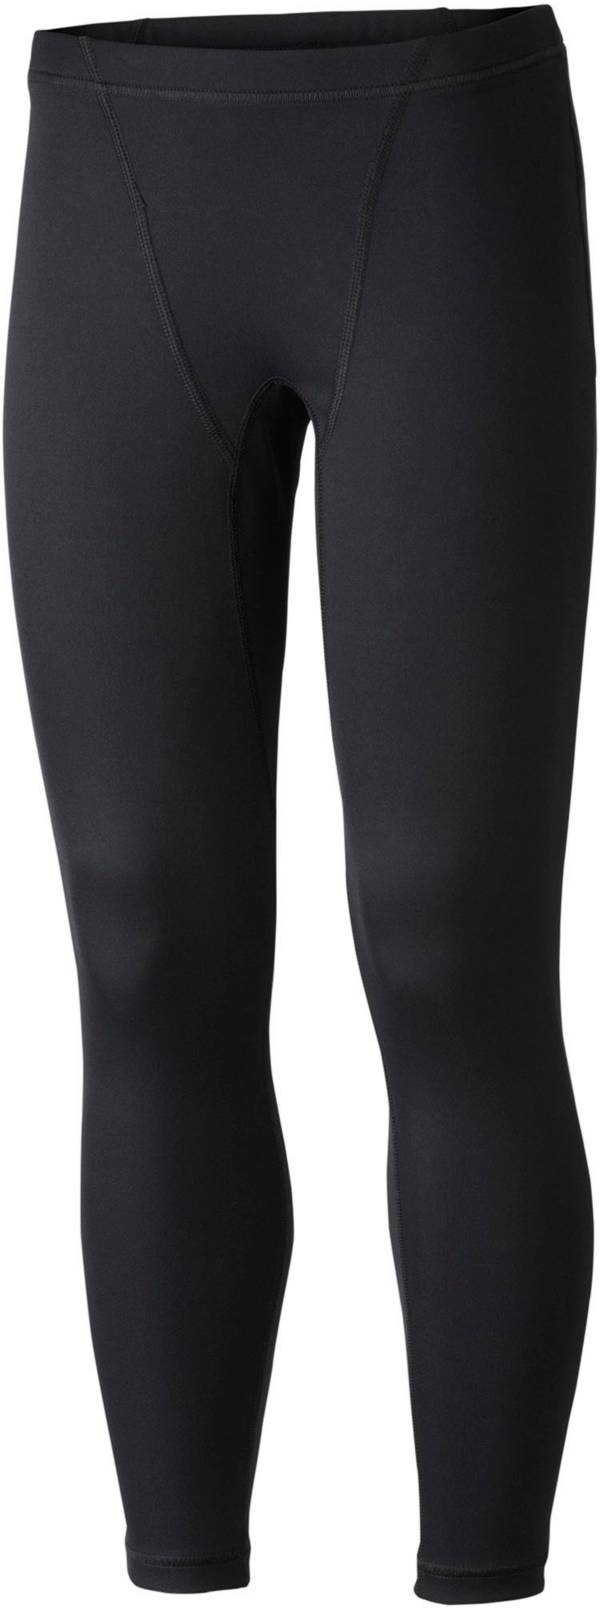 Columbia Youth Midweight Base Layer 2 Tights product image